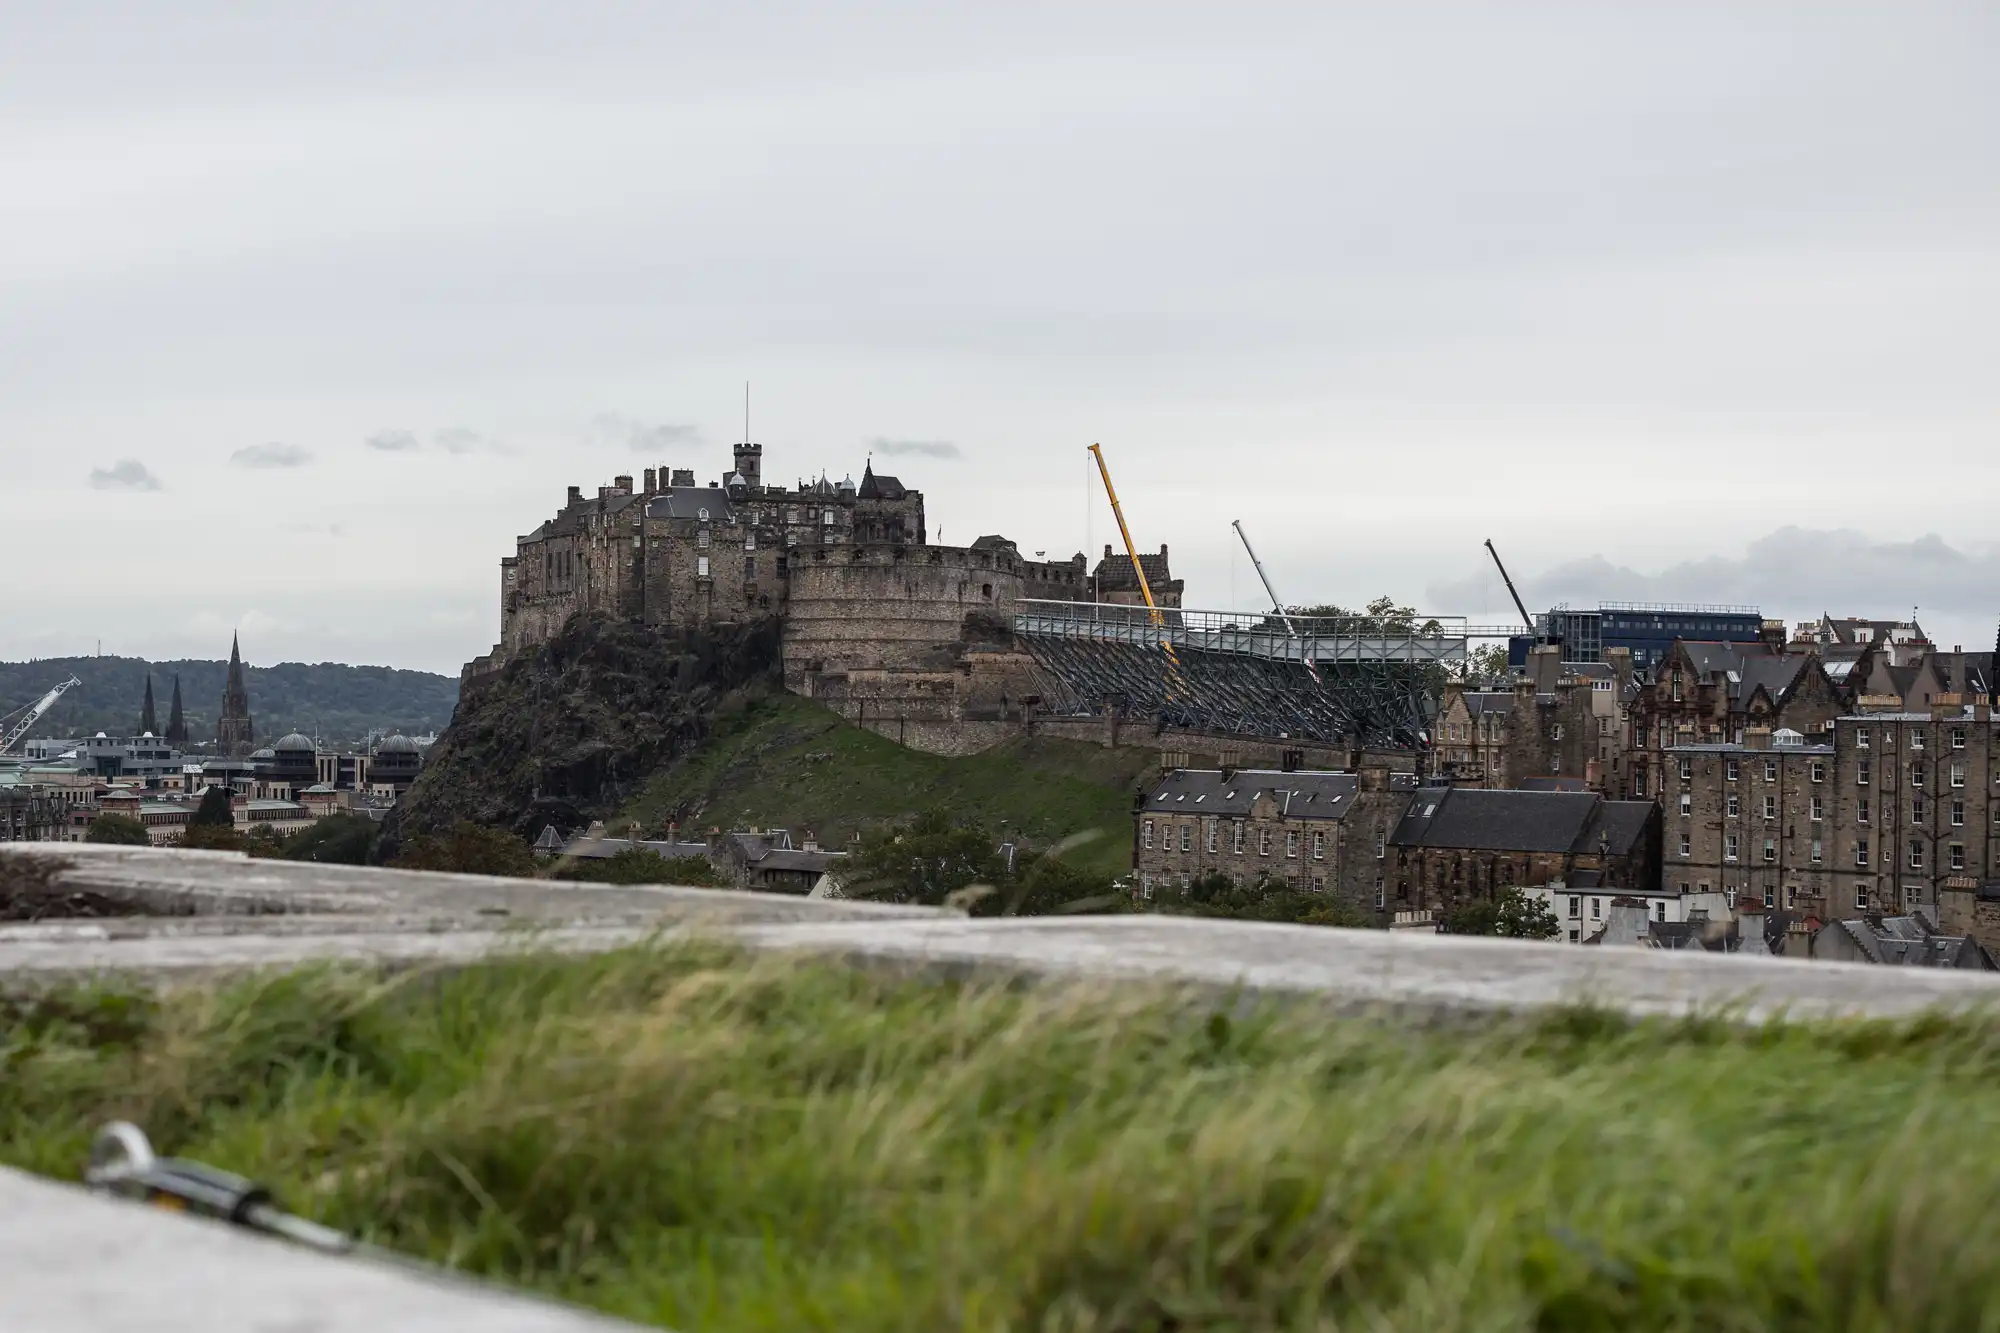 View of edinburgh castle on a cloudy day, with surrounding buildings and construction cranes visible.